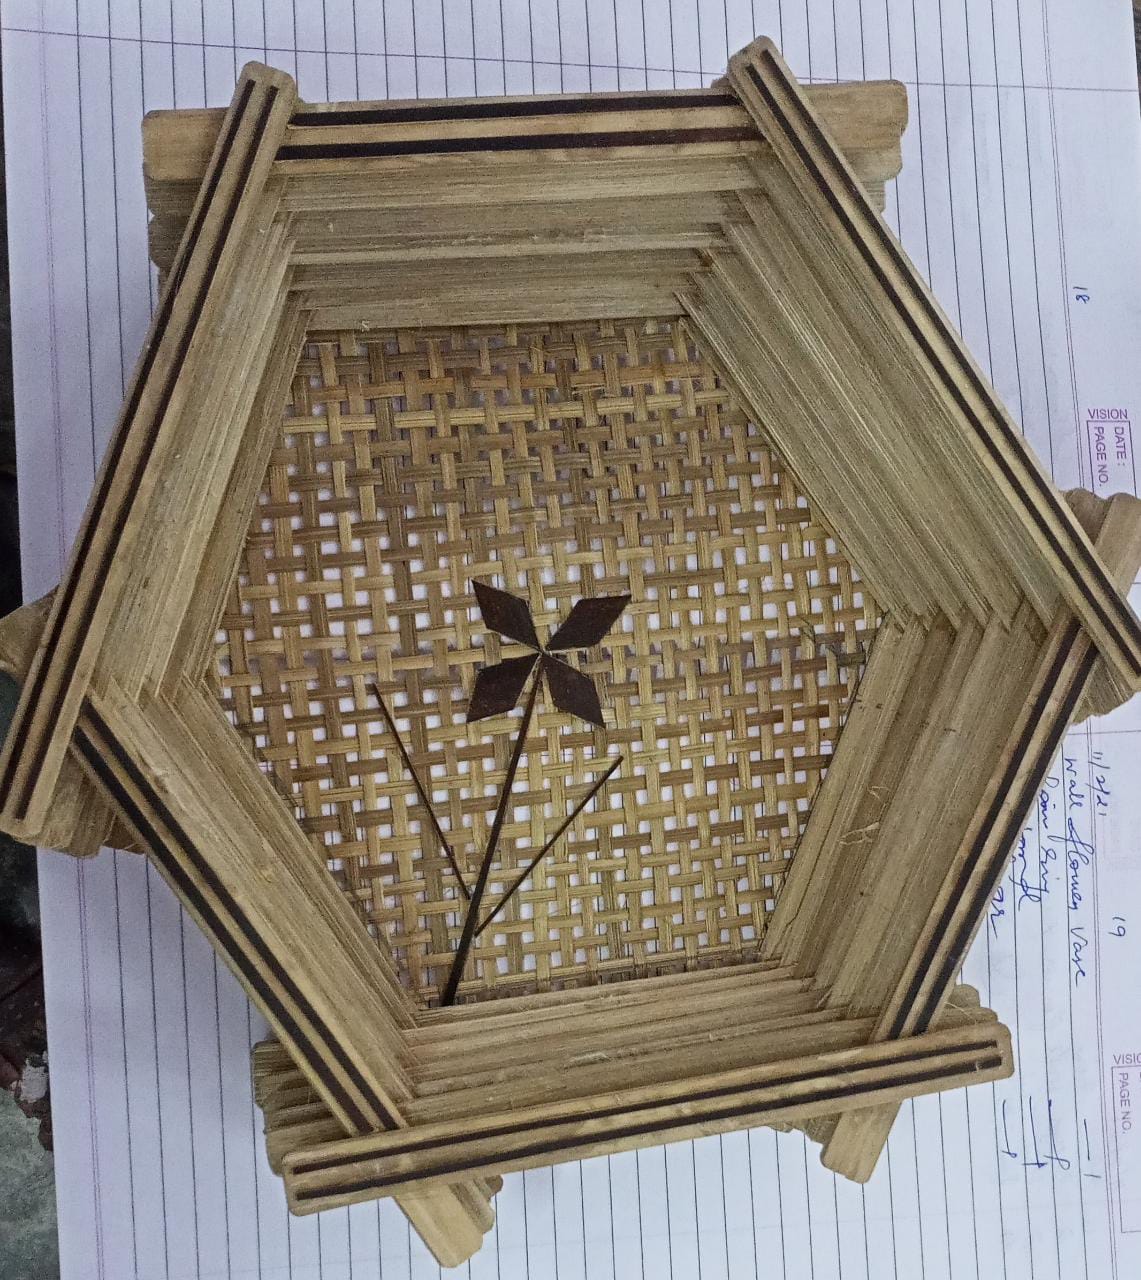 Bamboo tray made by trainees